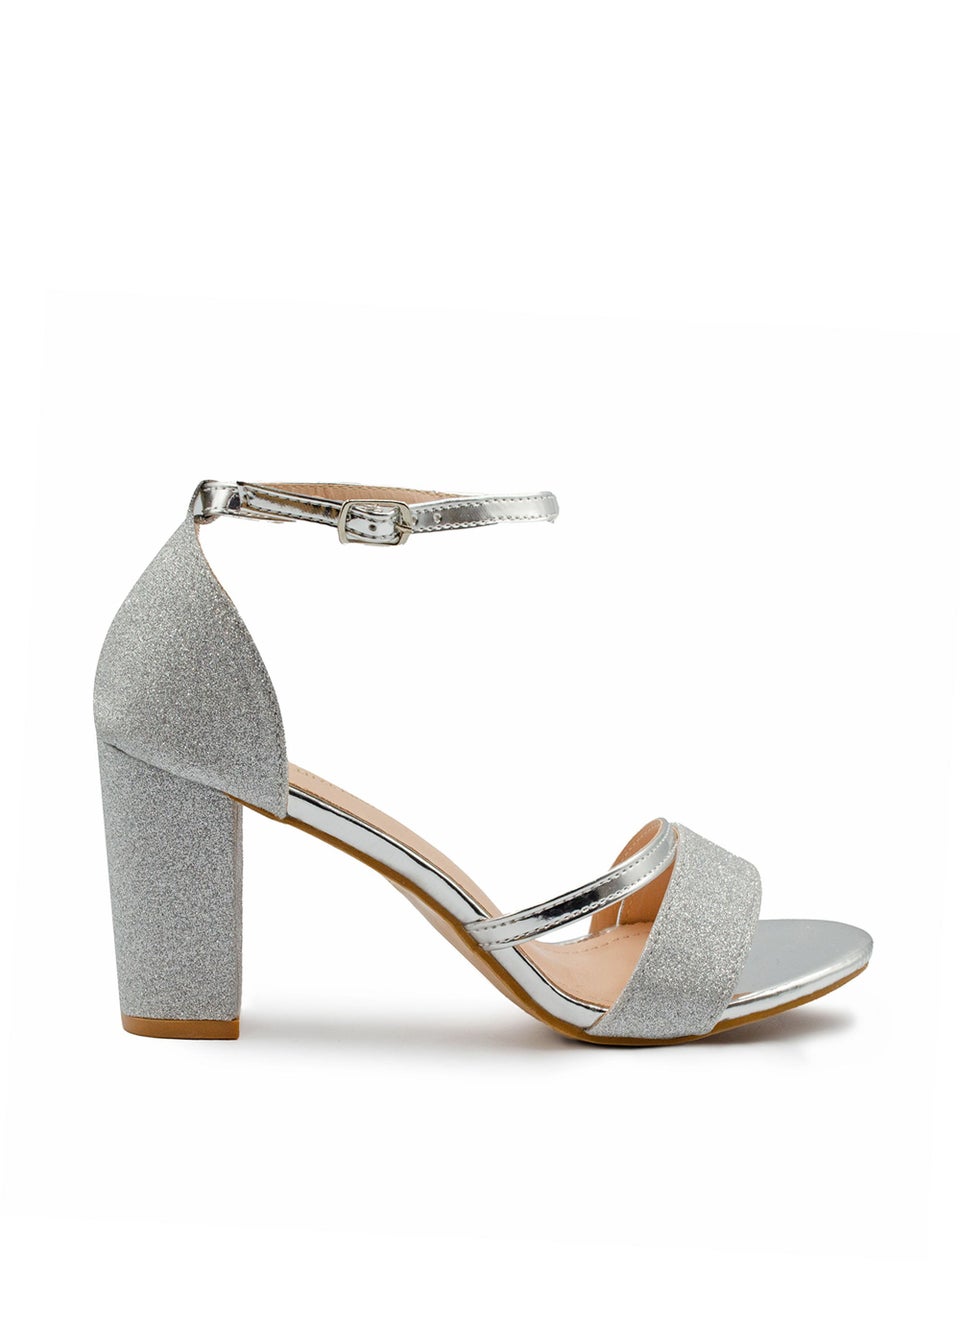 Where's That From Silver Glitter Perla Mid Block Heel Sandals